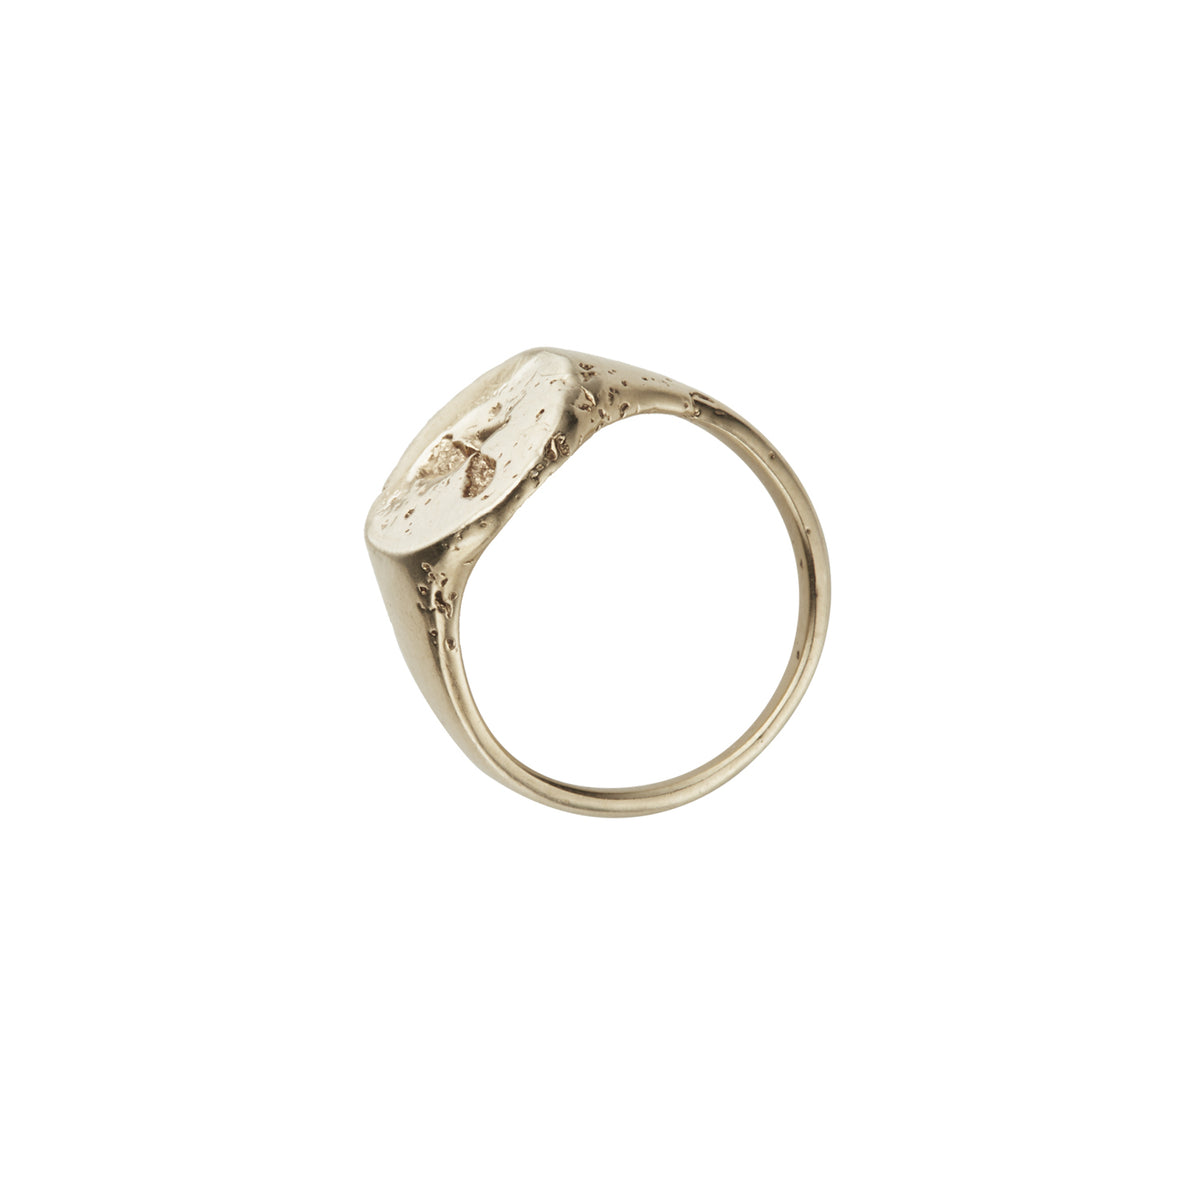 G&F Co.- OVAL SIGNET RING _ SILVER 925 & 18 GOLD COATING